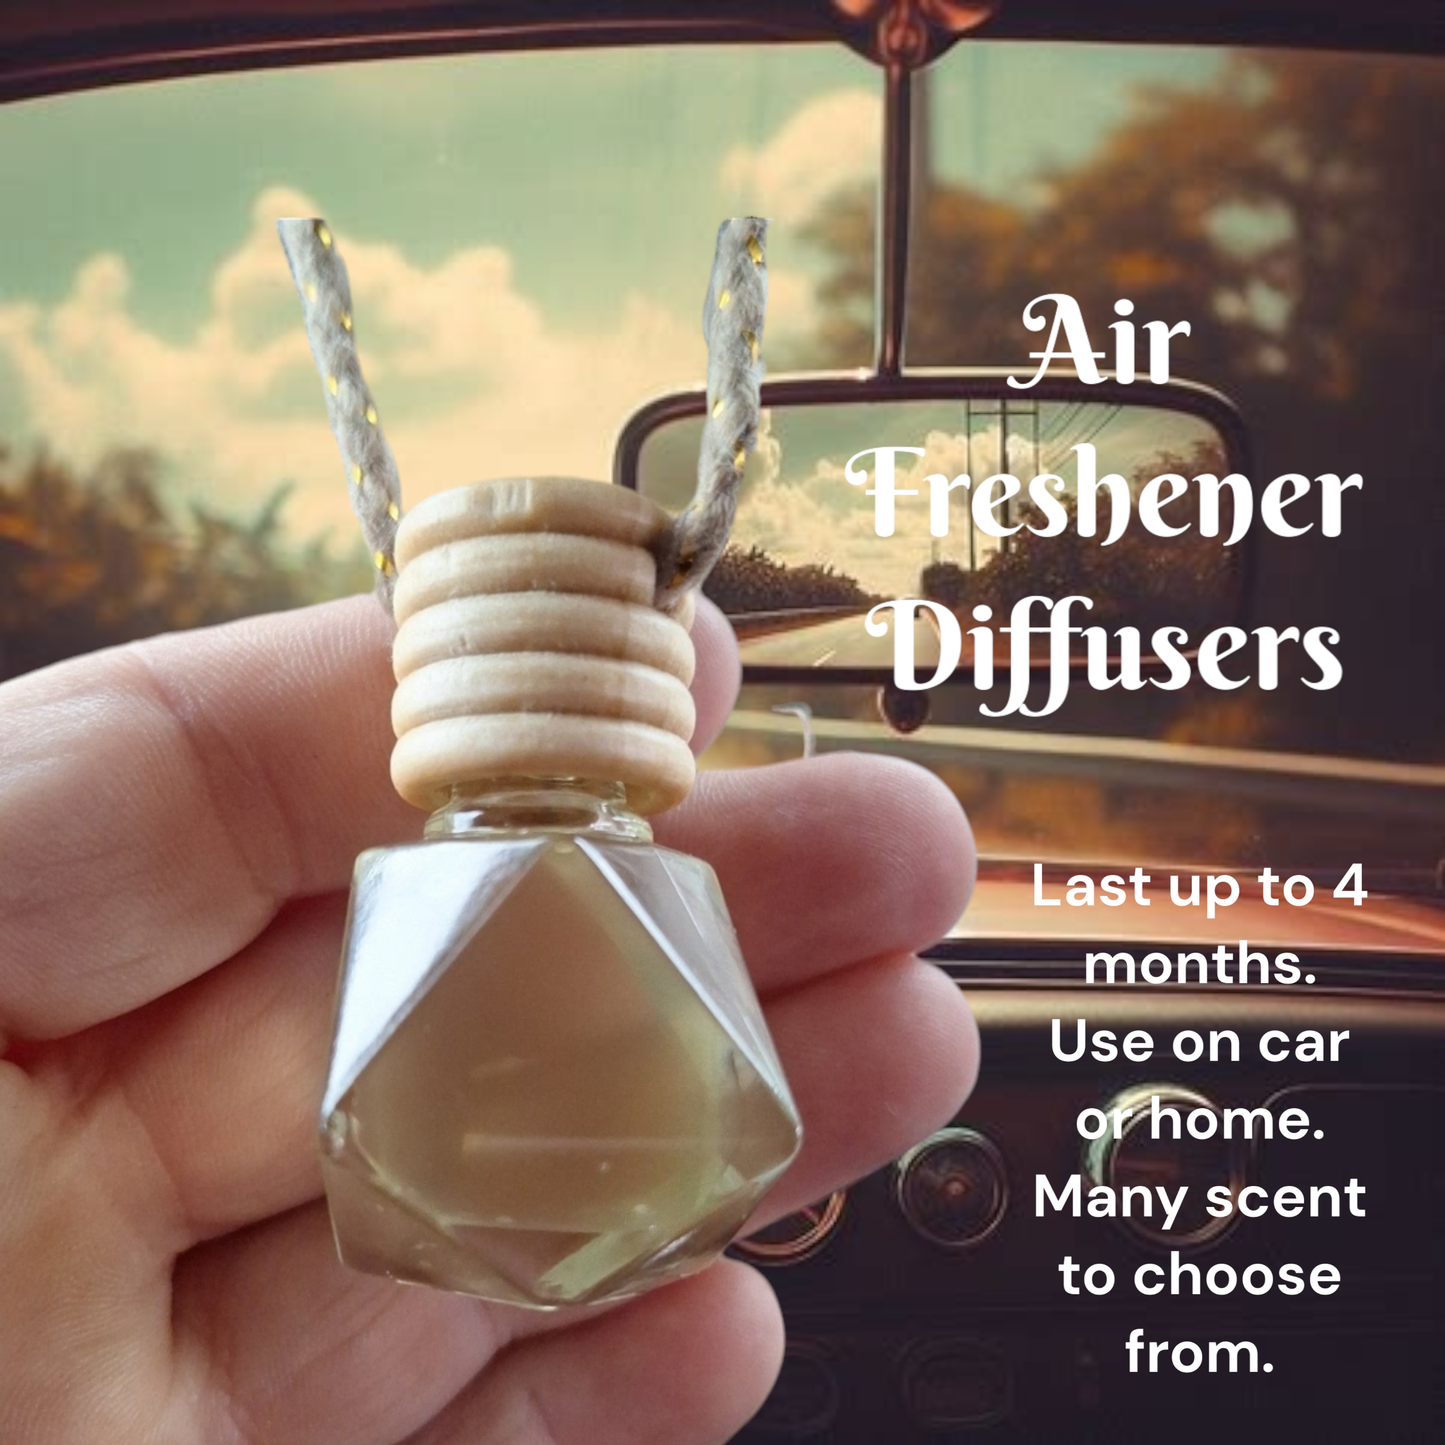 Butterscotch Apple Cider Donut Air Freshener Diffuser for your car or home.